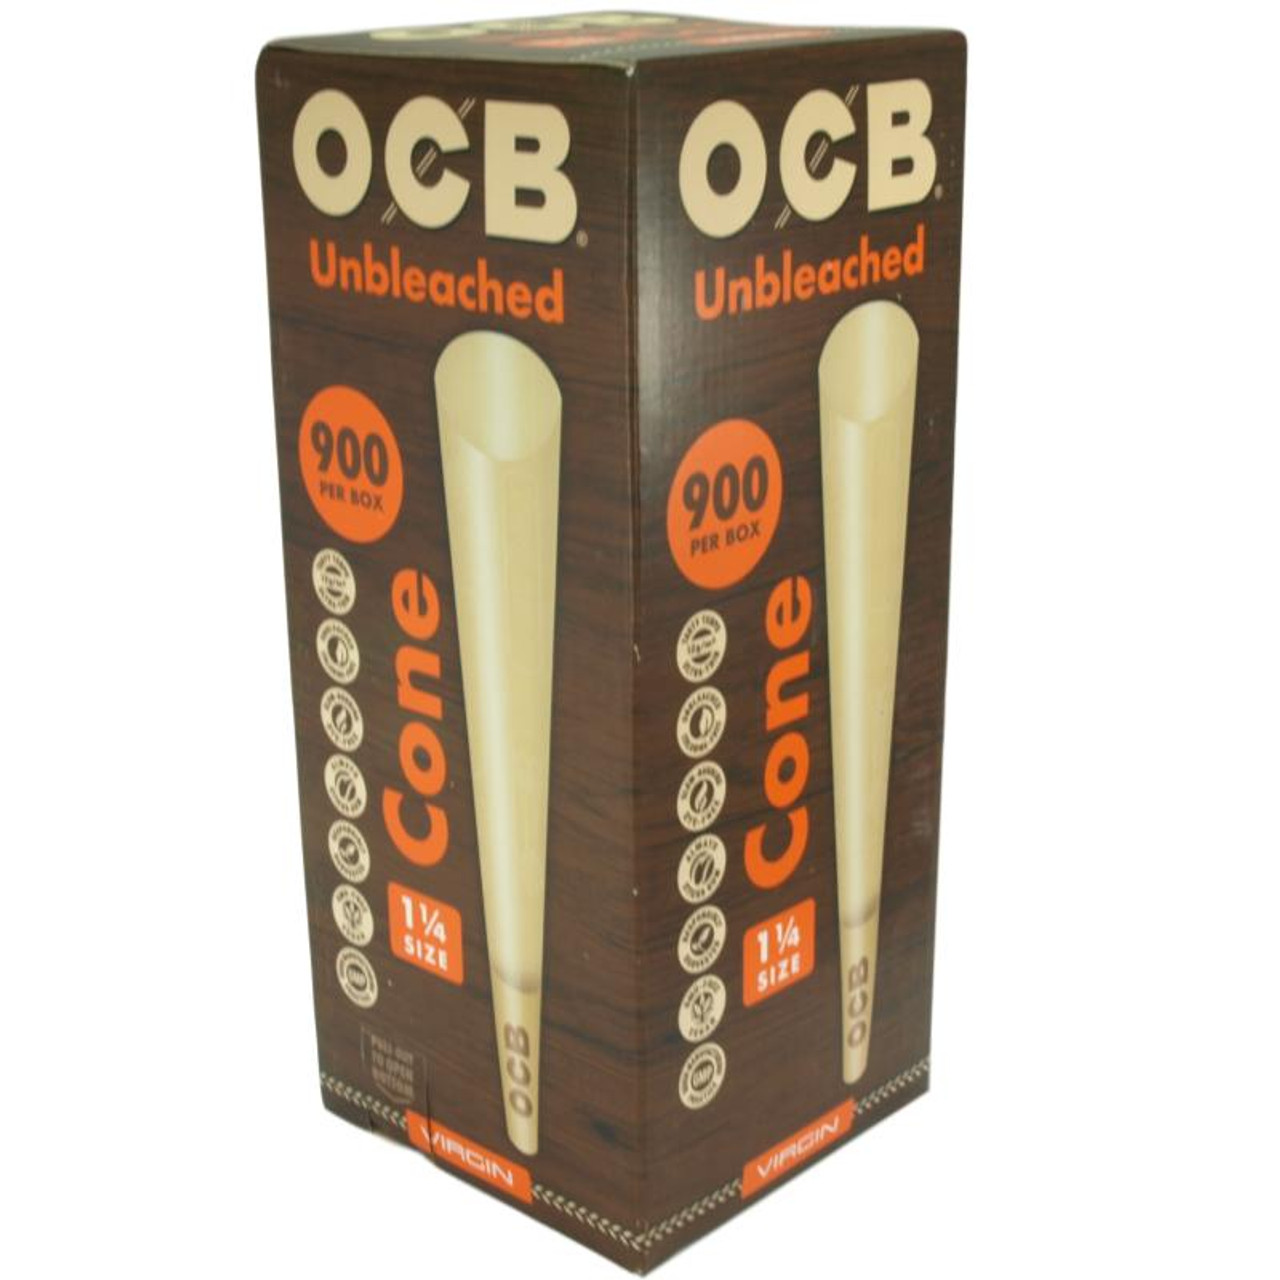 OCB Virgin Unbleached Pre-Rolled Cones 1 1/4 Size 900 ct.